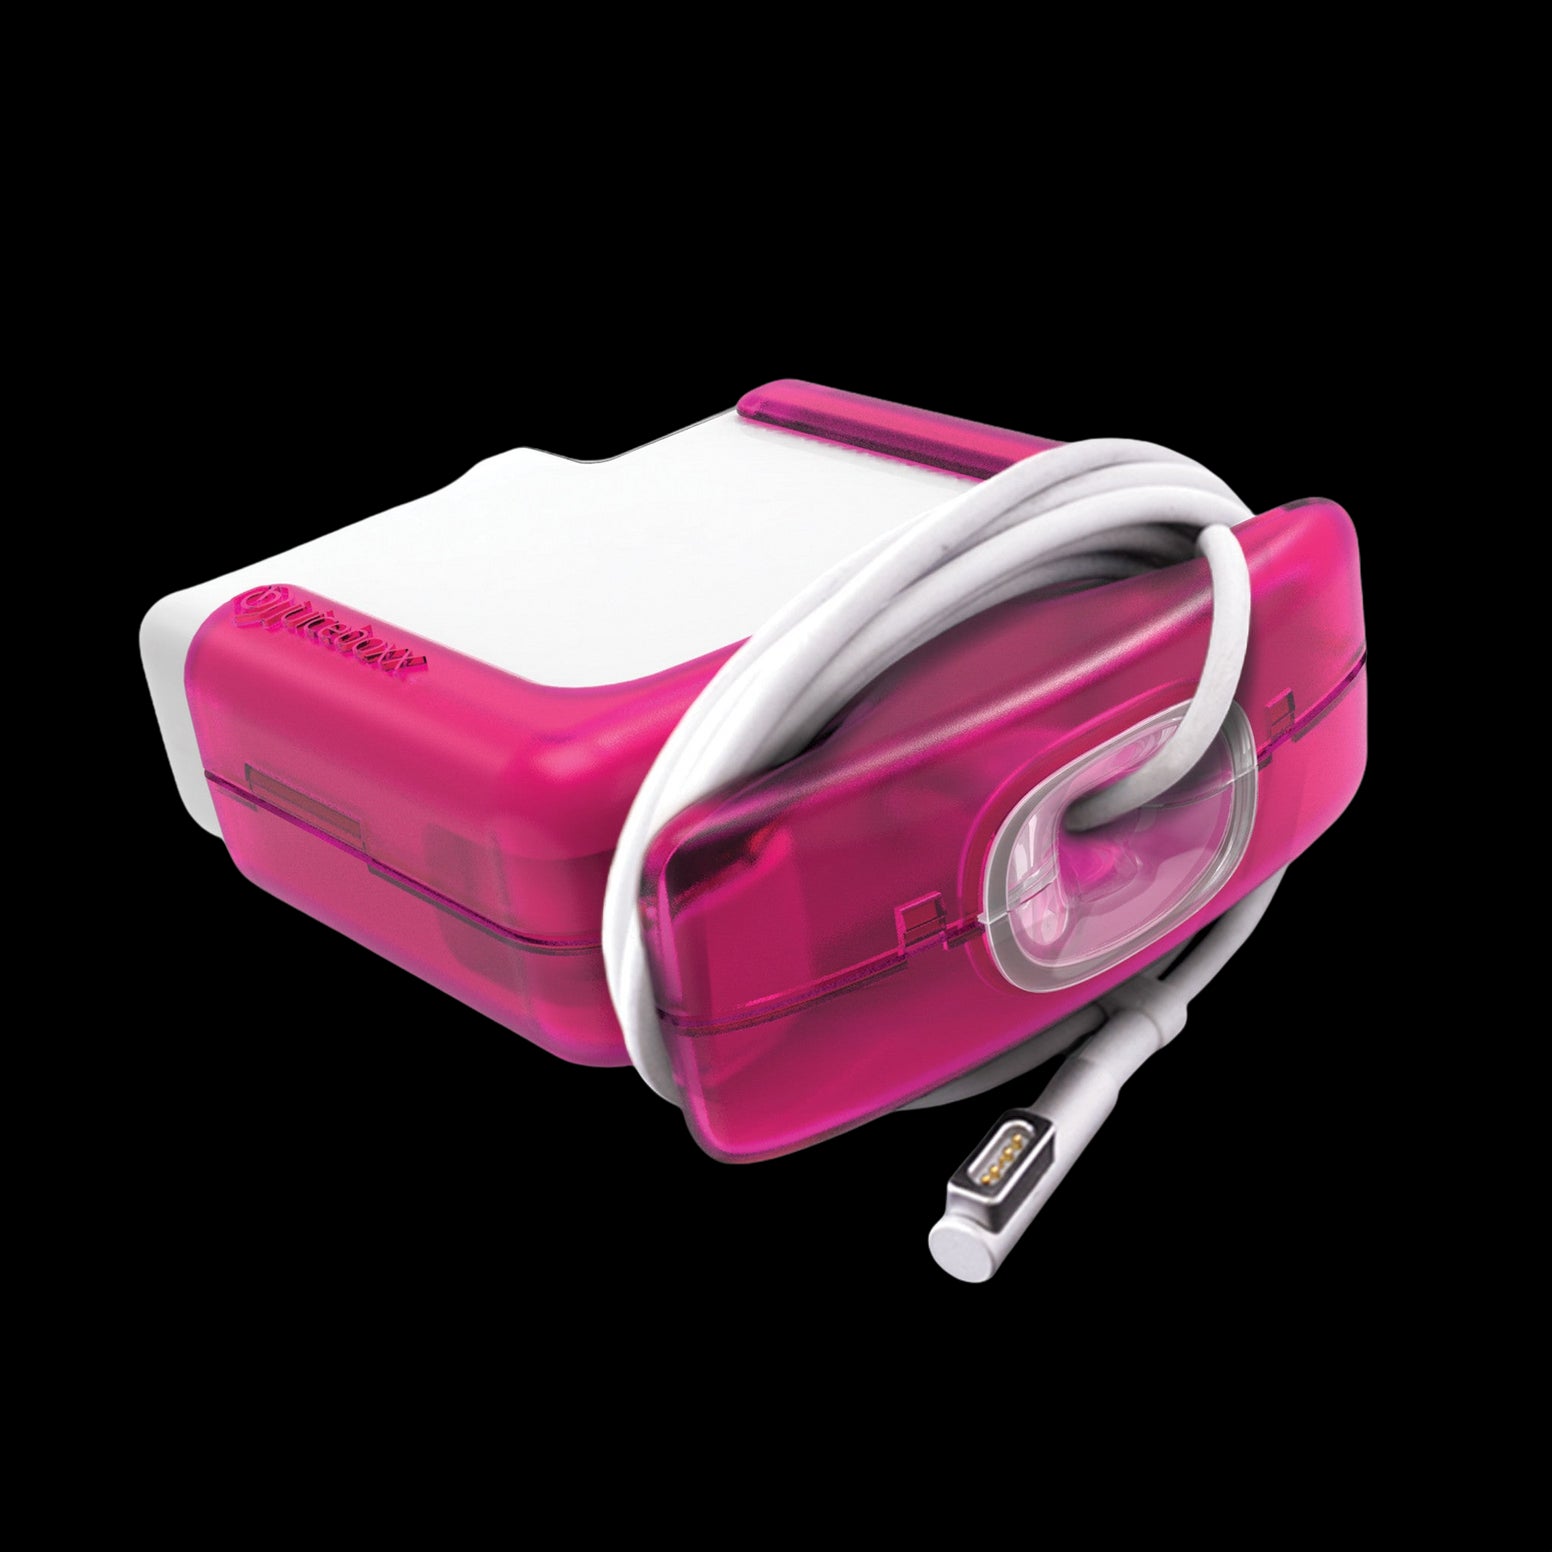 Juiceboxx Charger Case (for 60w Apple Power Adapter/Charger) - Magenta